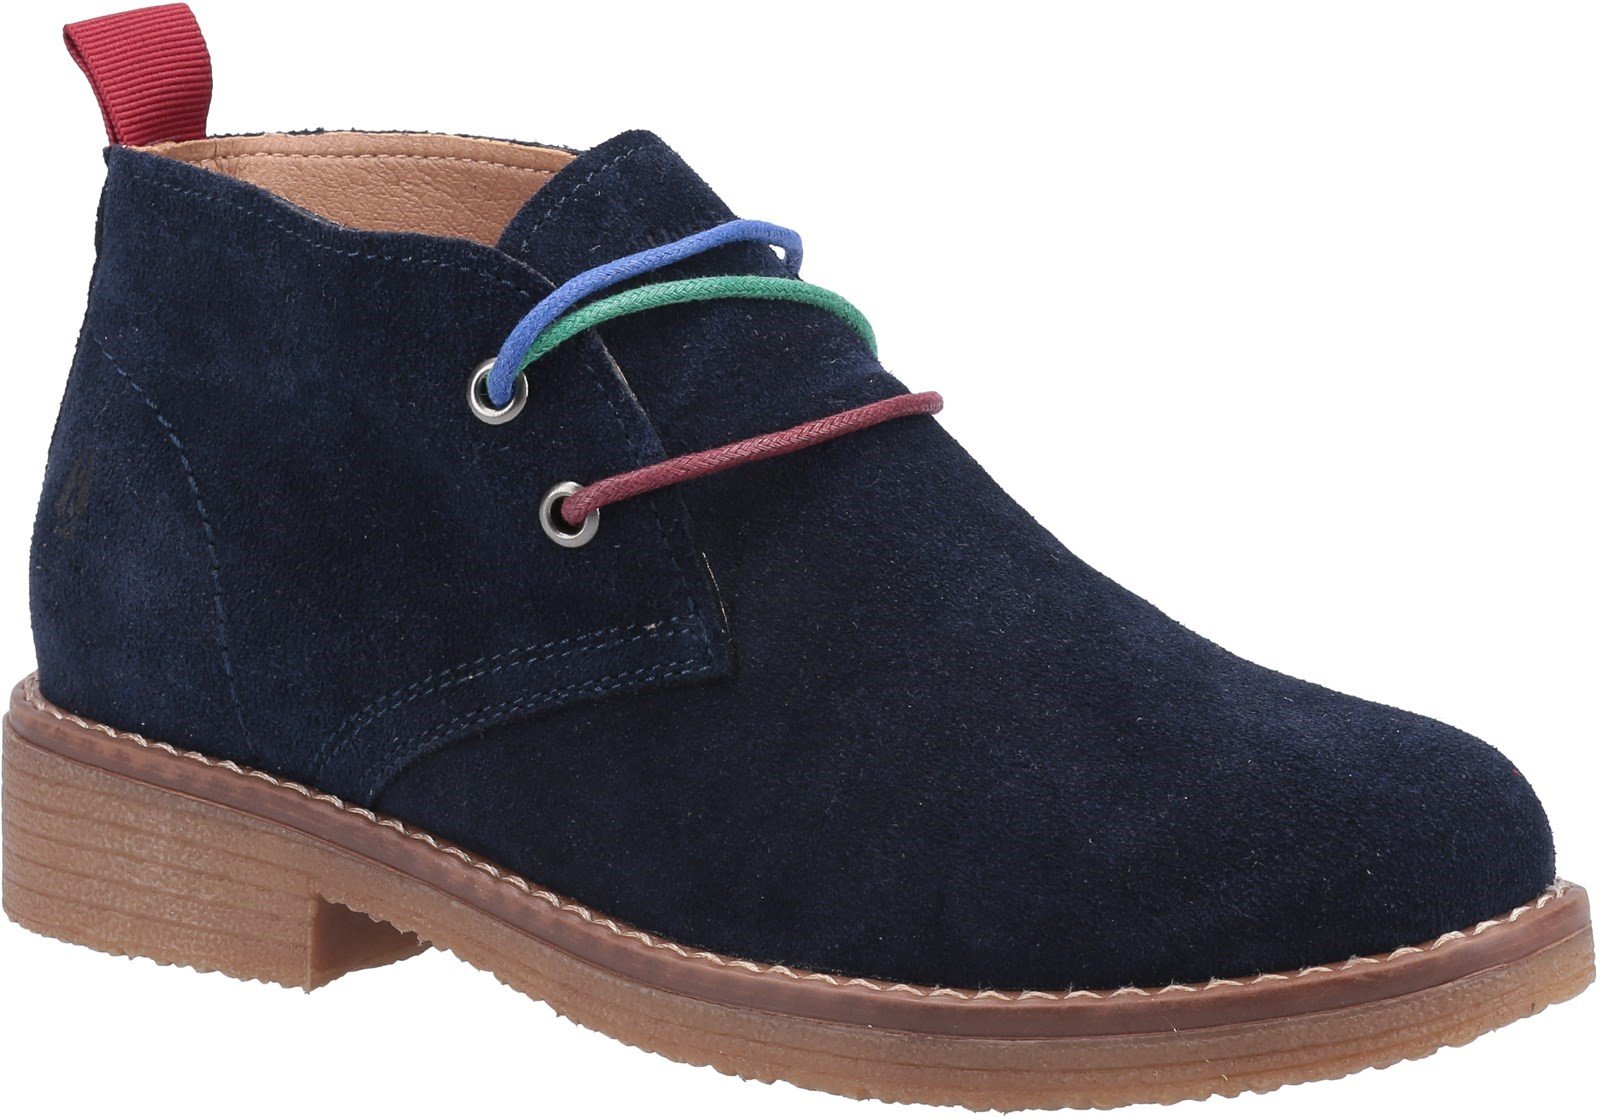 Hush Puppies Women's Marie Ankle Boots Various Colours 31951 - Navy 3